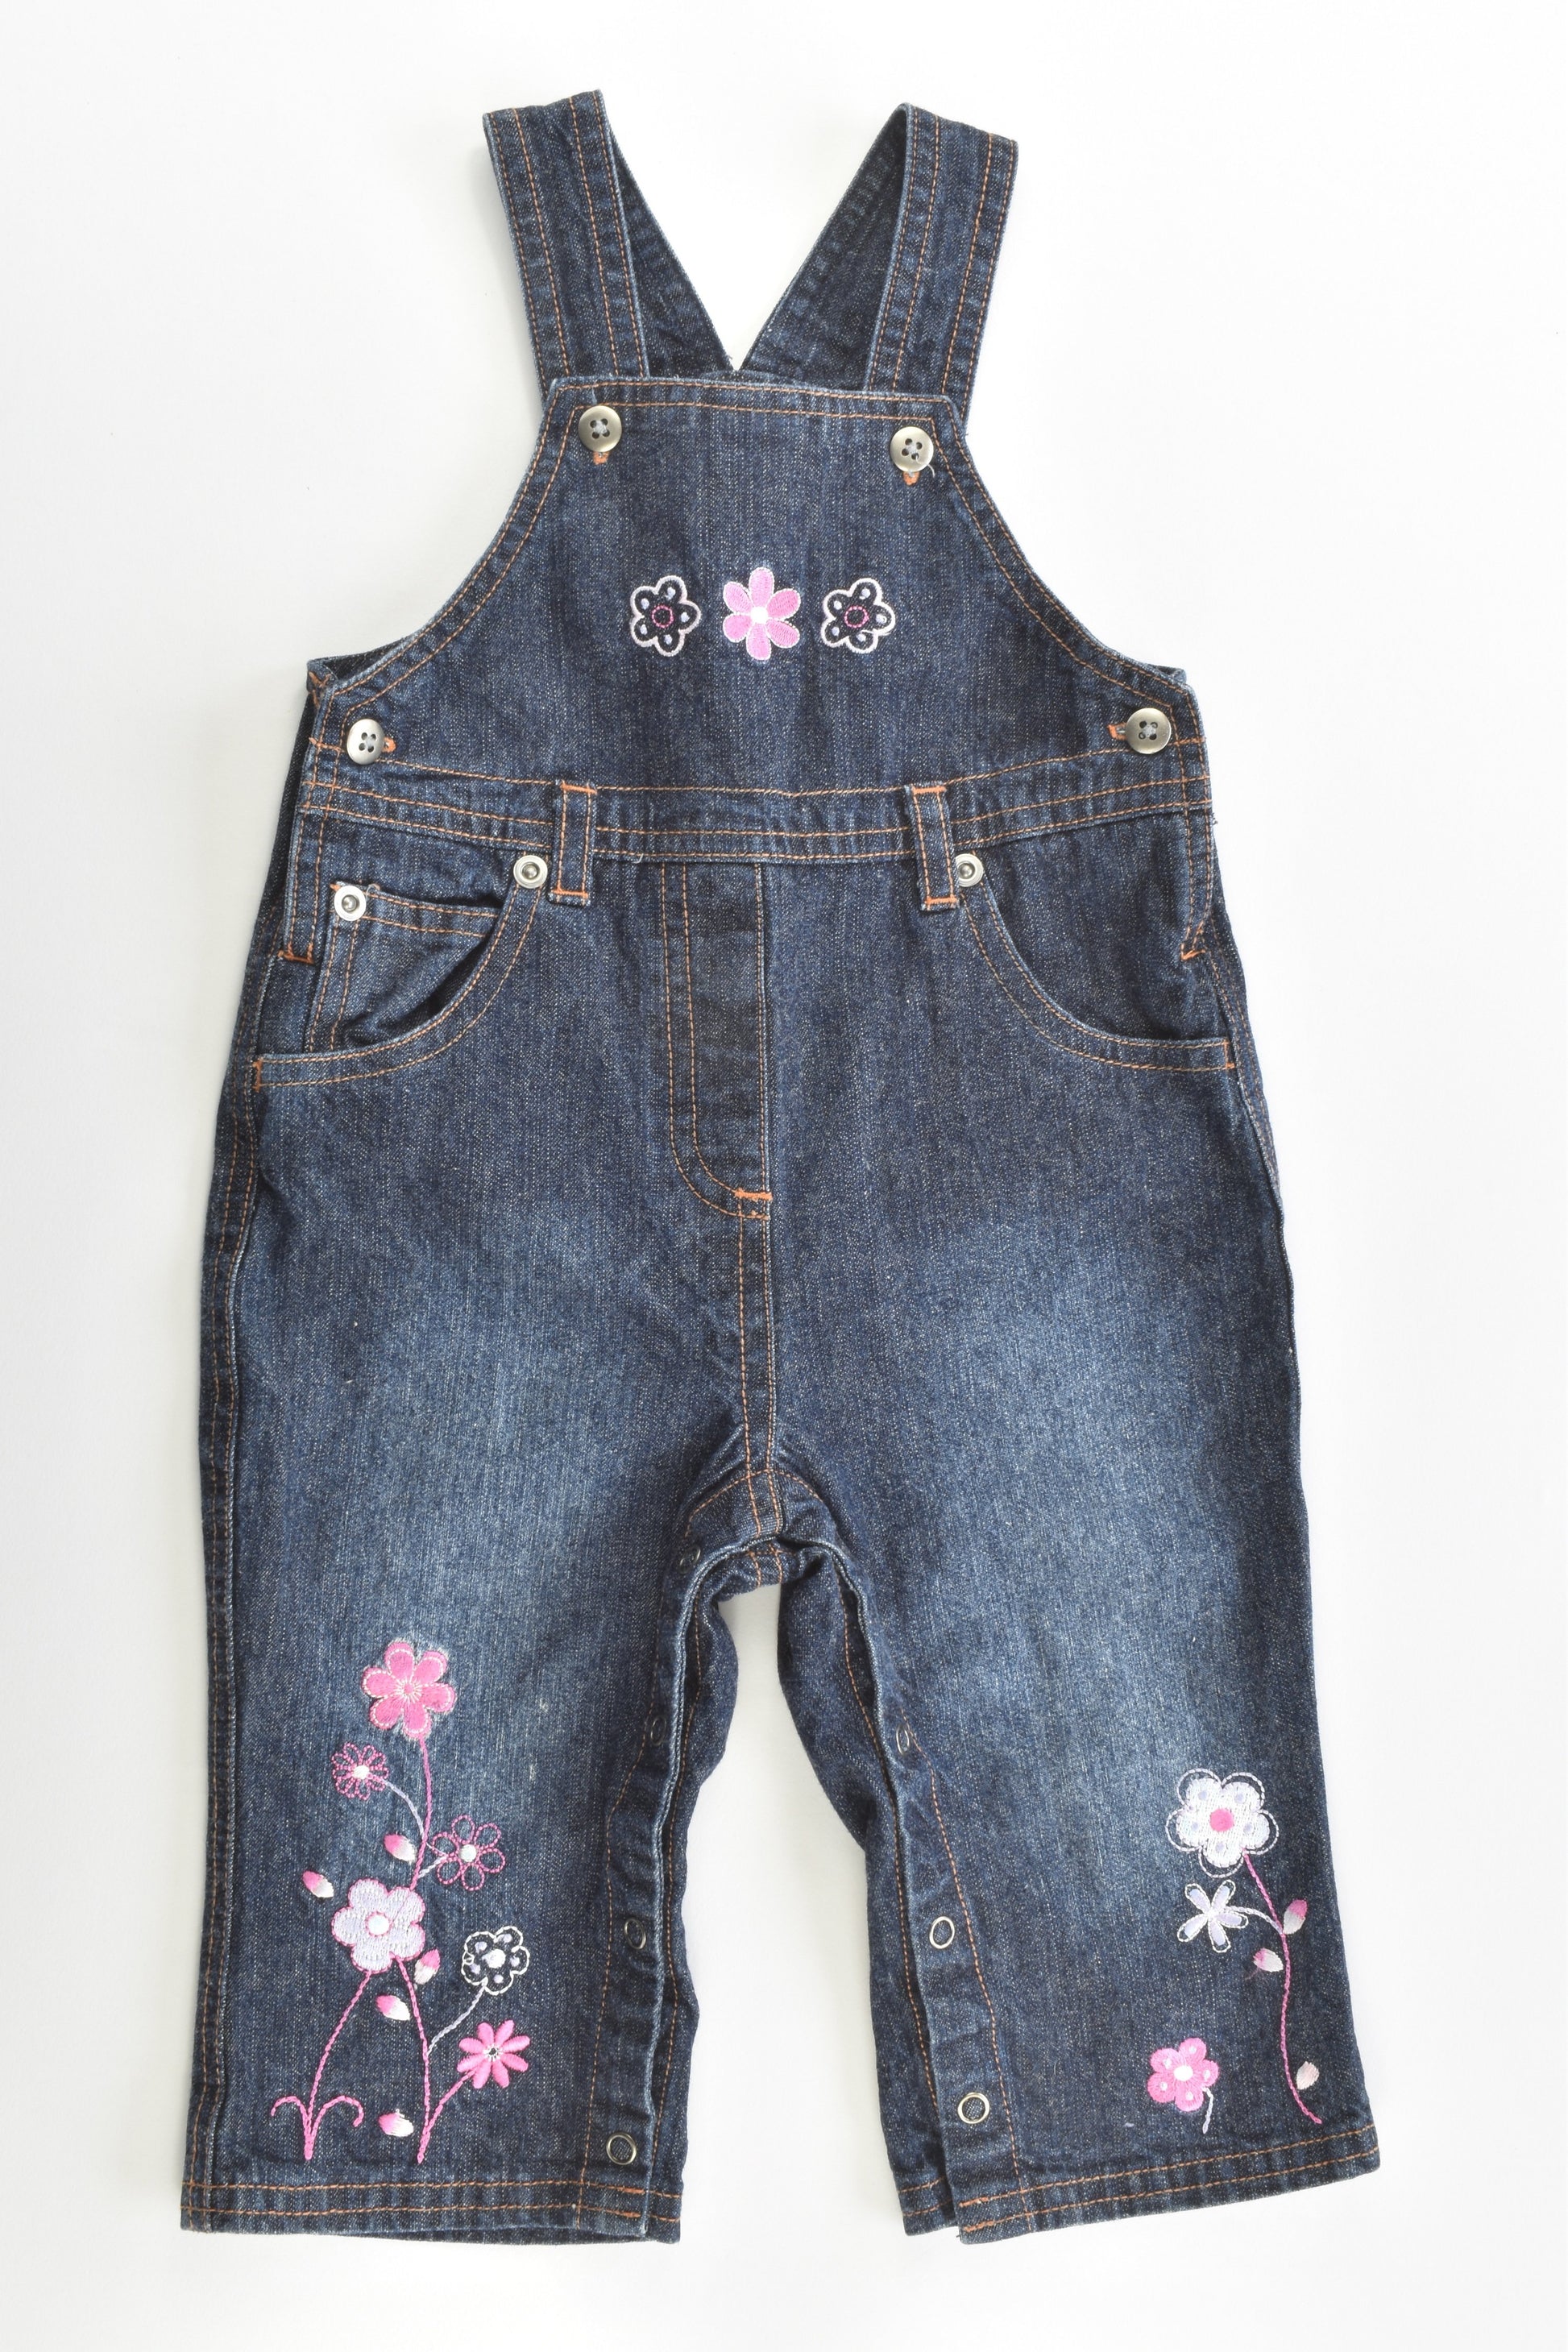 Target Size 0 Denim Overalls with Floral Embroidery